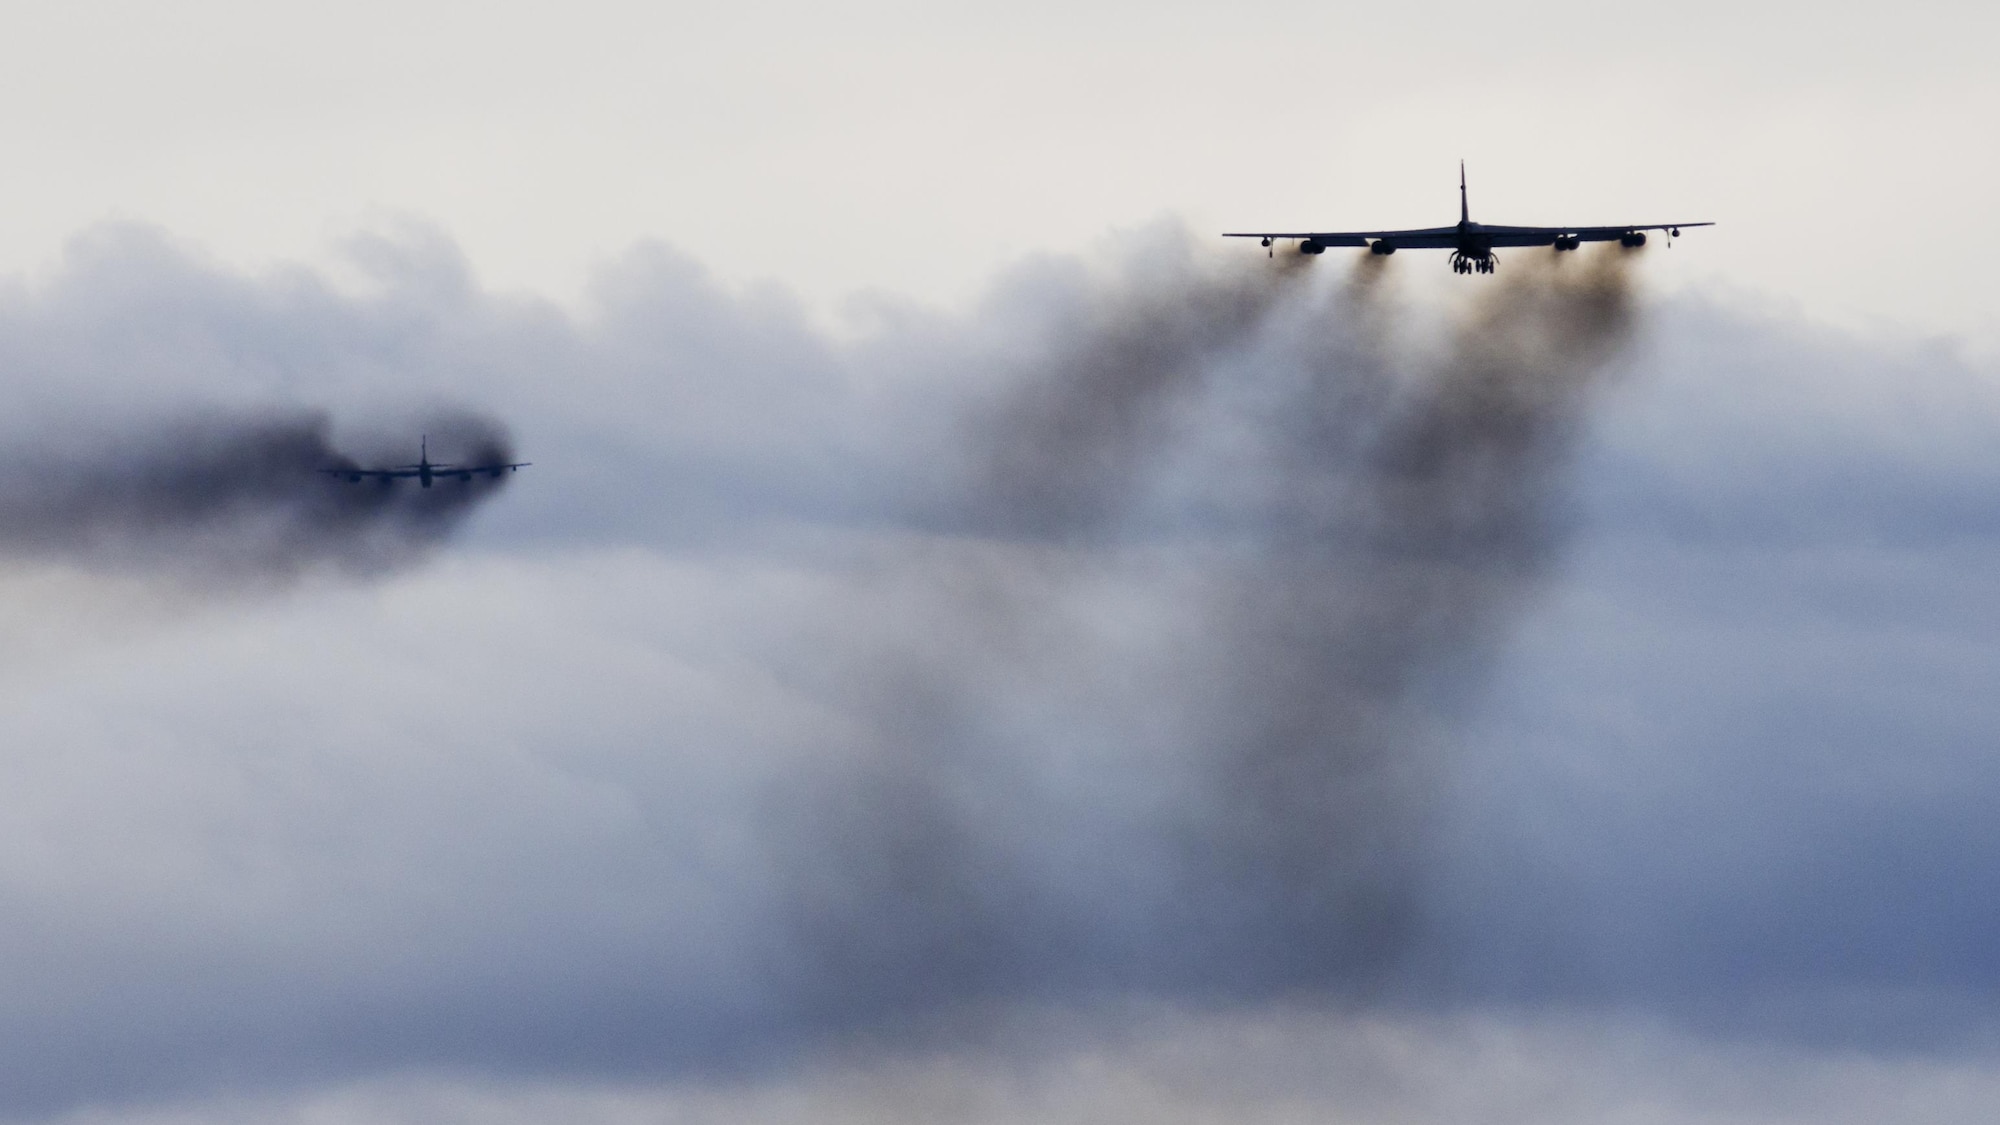 Two B-52H Stratofortresses soar through the air during Prairie Vigilance 16-1 at Minot Air Force Base, N.D., Sept. 16, 2016. The exercise concluded with the rapid fly- off, successfully launching a sequence of 12 B-52s to showcase their active capability to execute the mission. (U.S. Air Force photo/Airman 1st Class J.T. Armstrong)